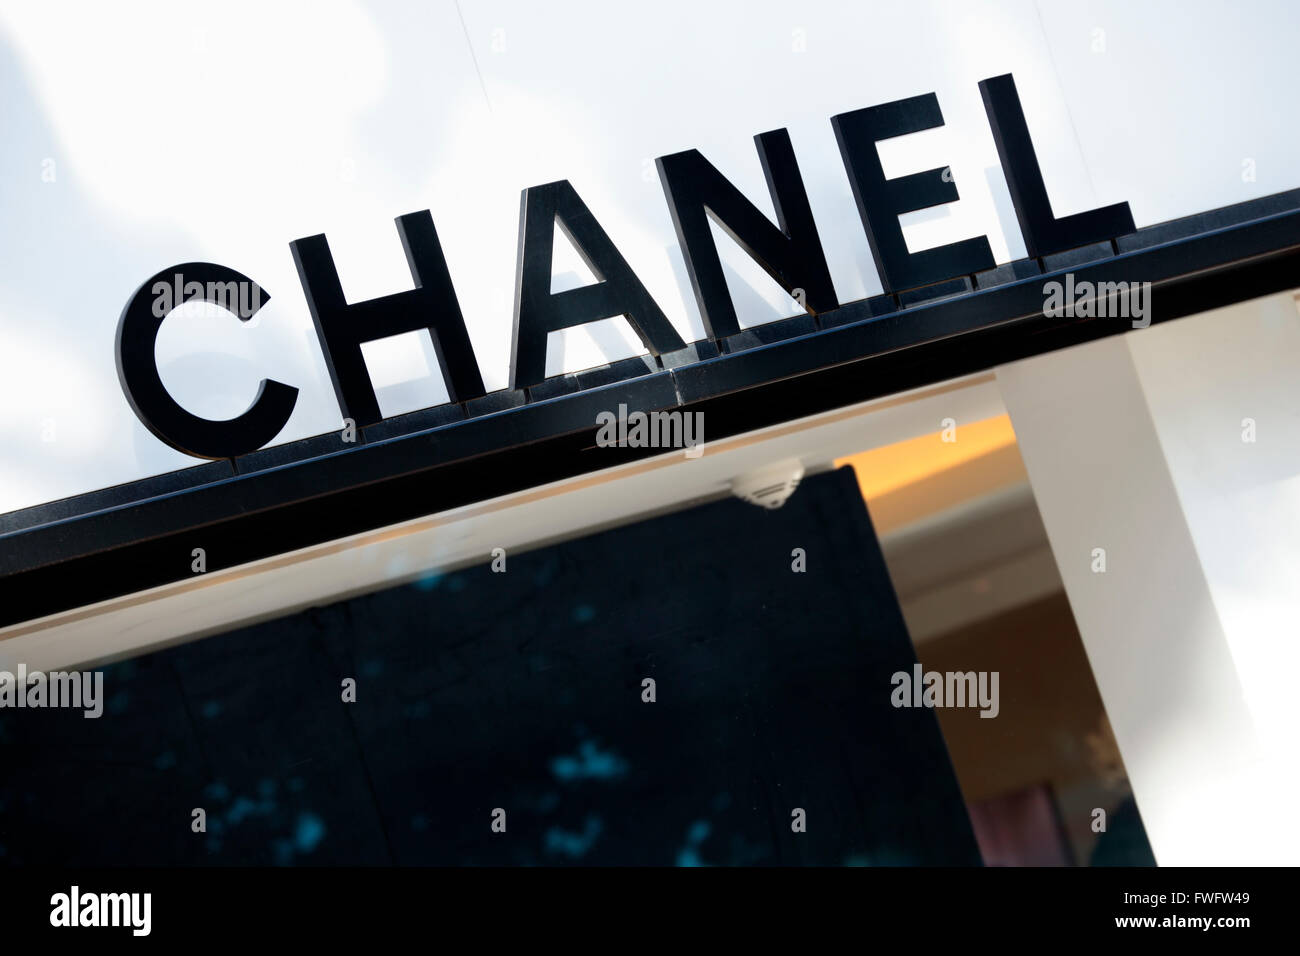 Chanel sign and shop front with part of window display. Stock Photo